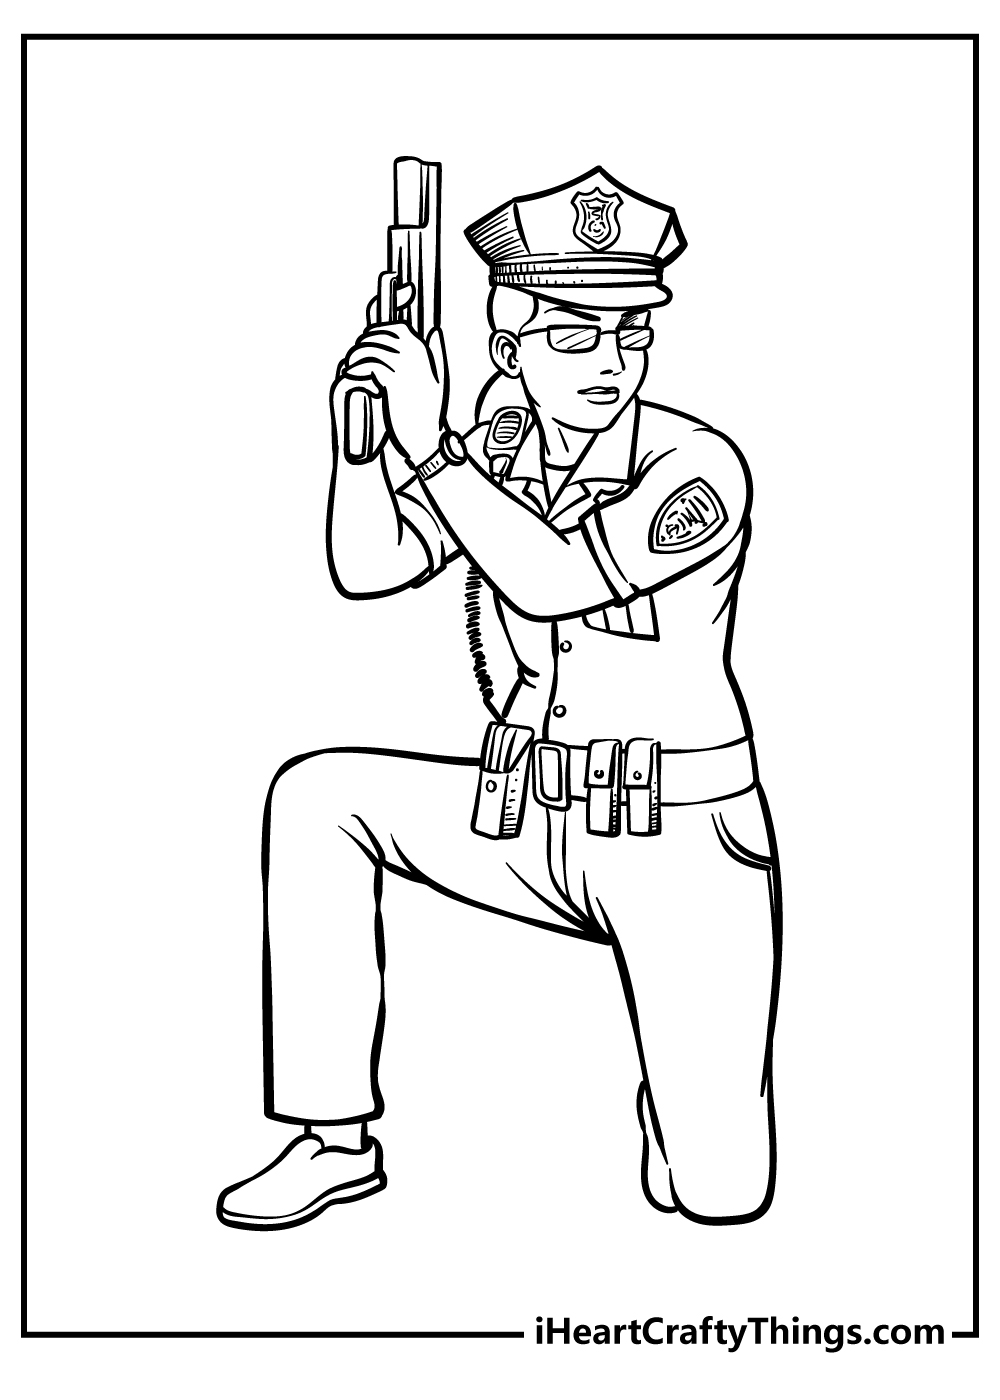 Police Coloring Sheet for children free download